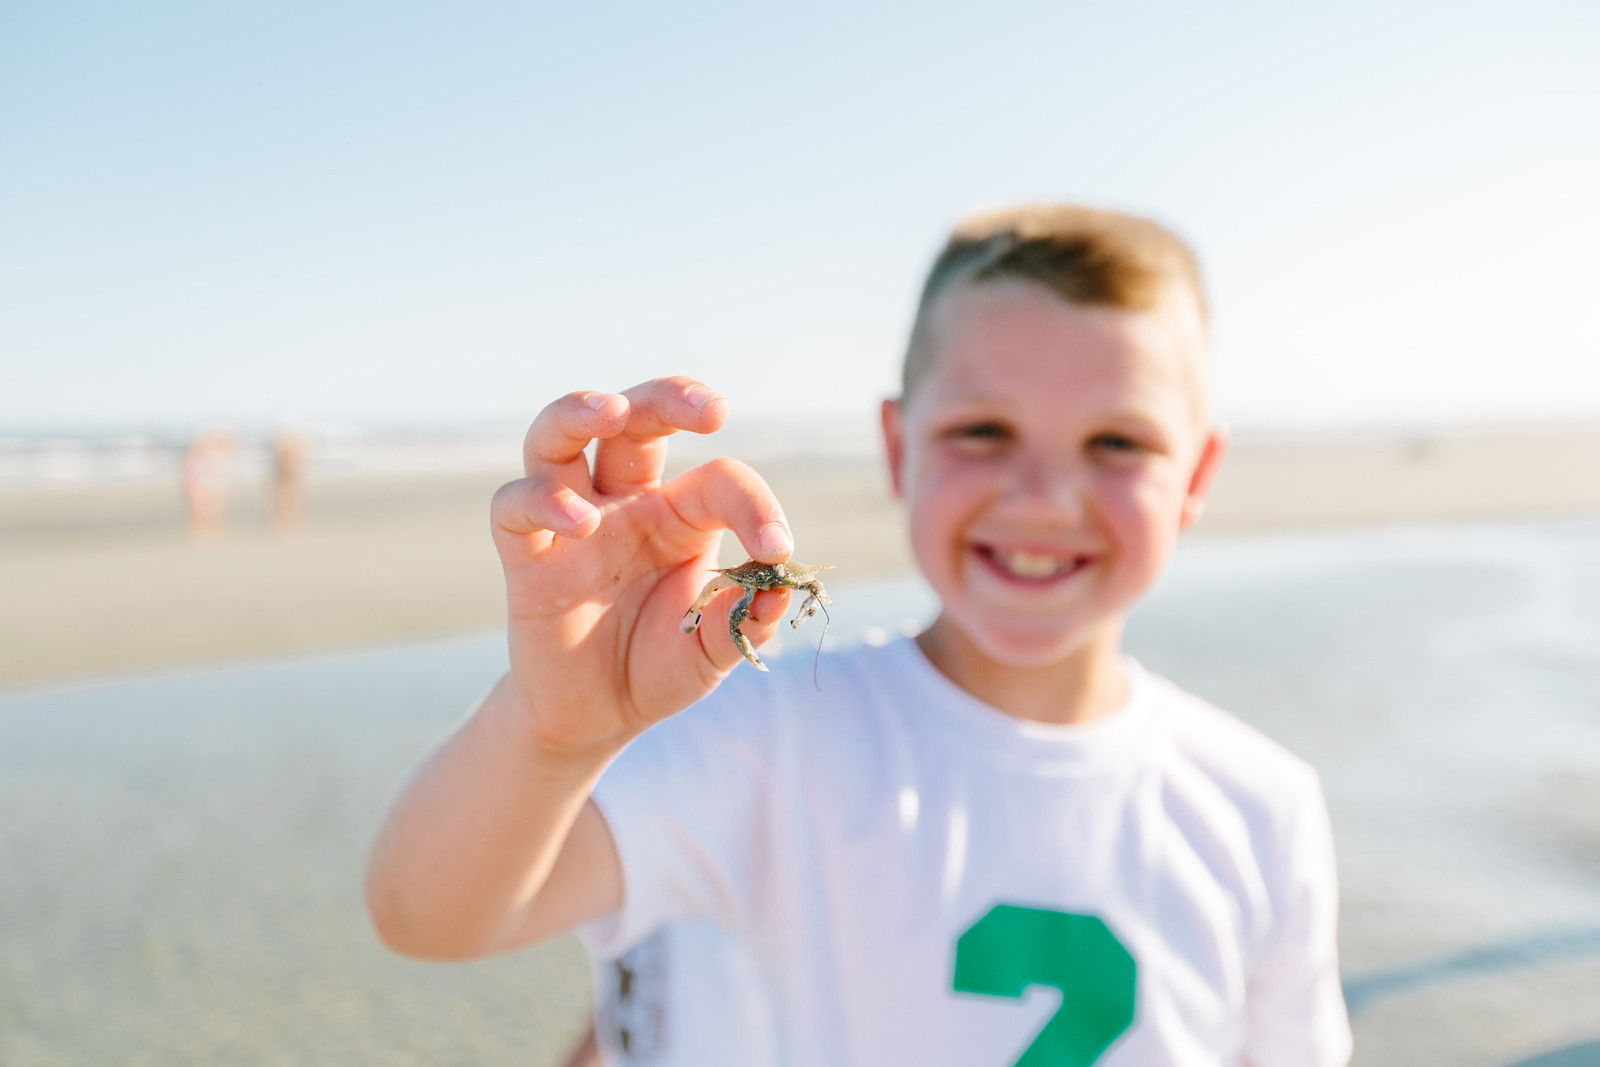  Hermit Crab? Or? Either way, an exciting discovery! 